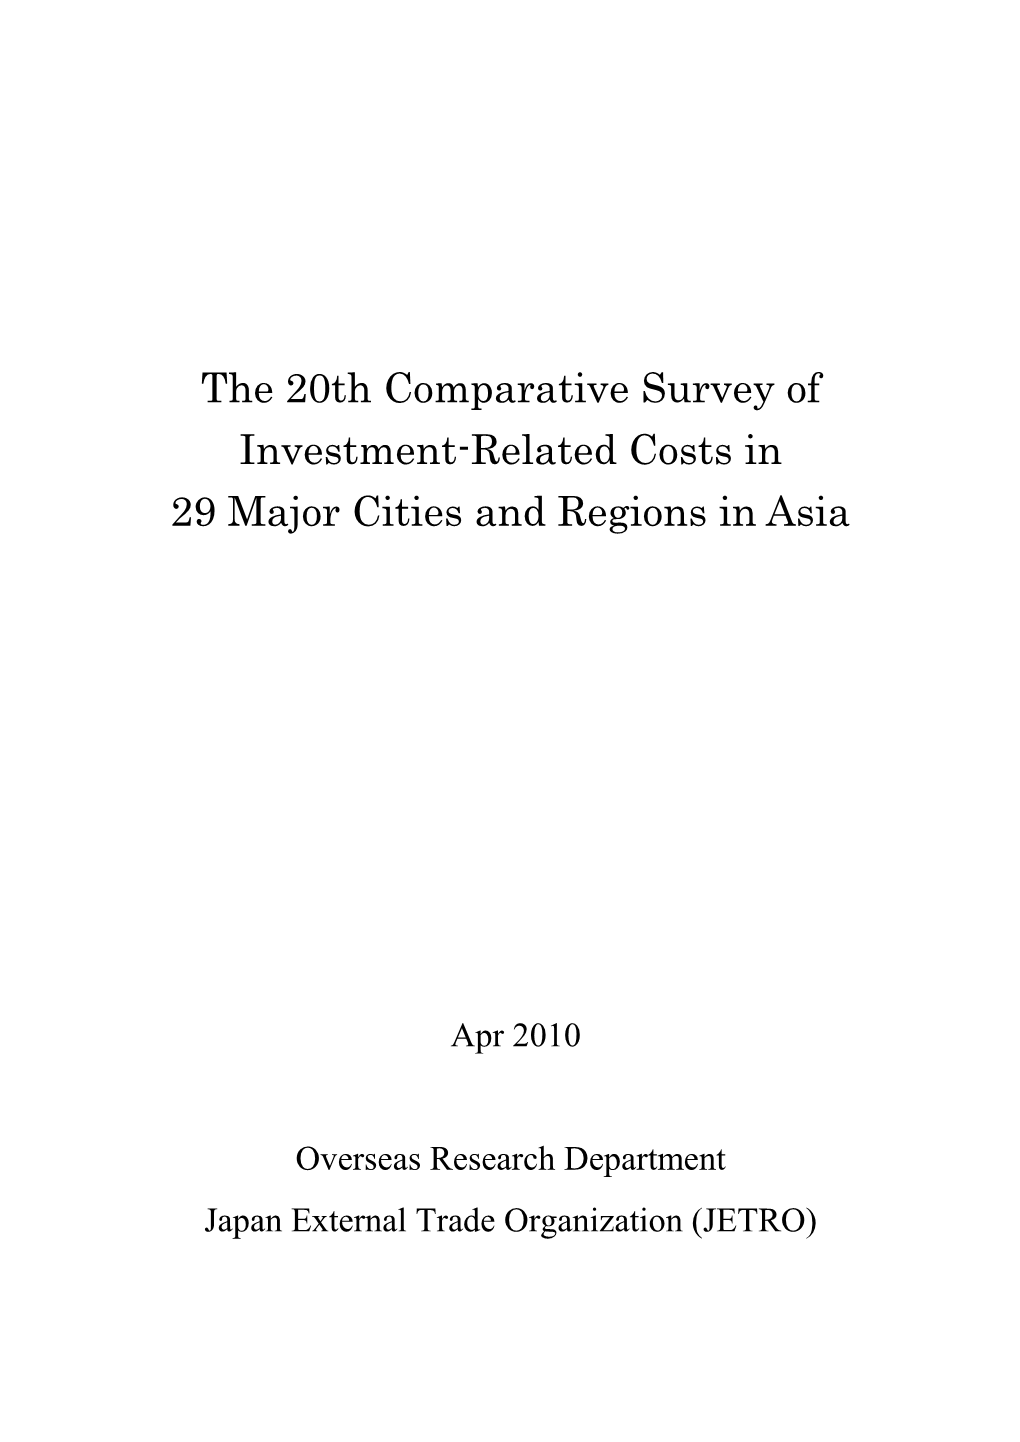 The 20Th Comparative Survey of Investment-Related Costs in 29